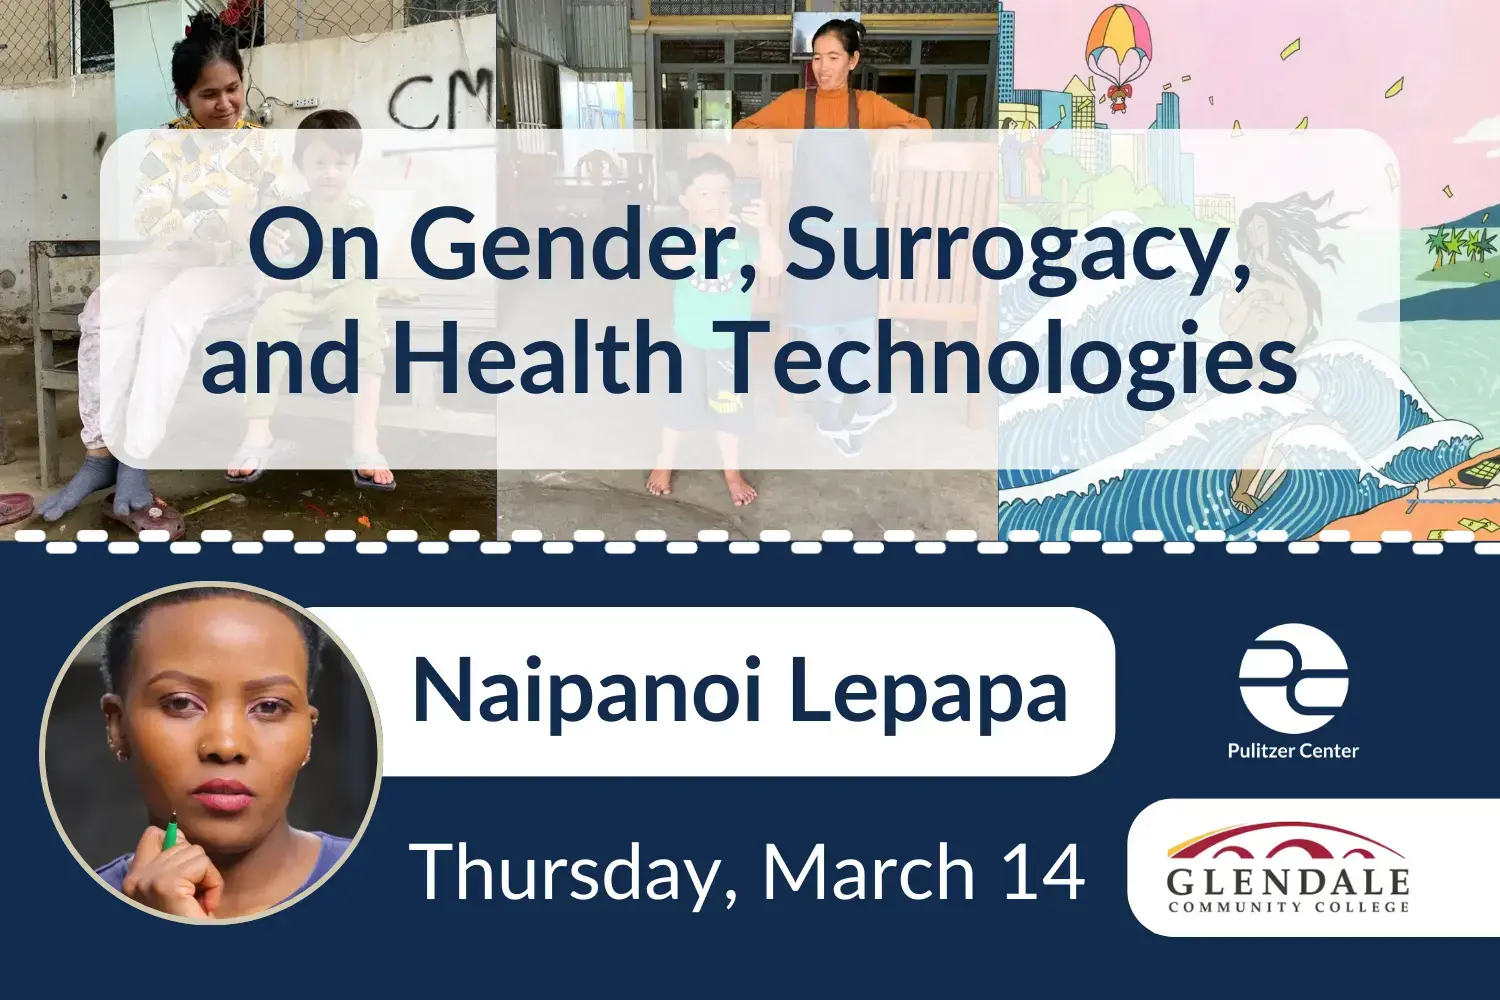 On Gender, Surrogacy, and Health Technologies: Naipanoi Lepapa at Glendale Community College